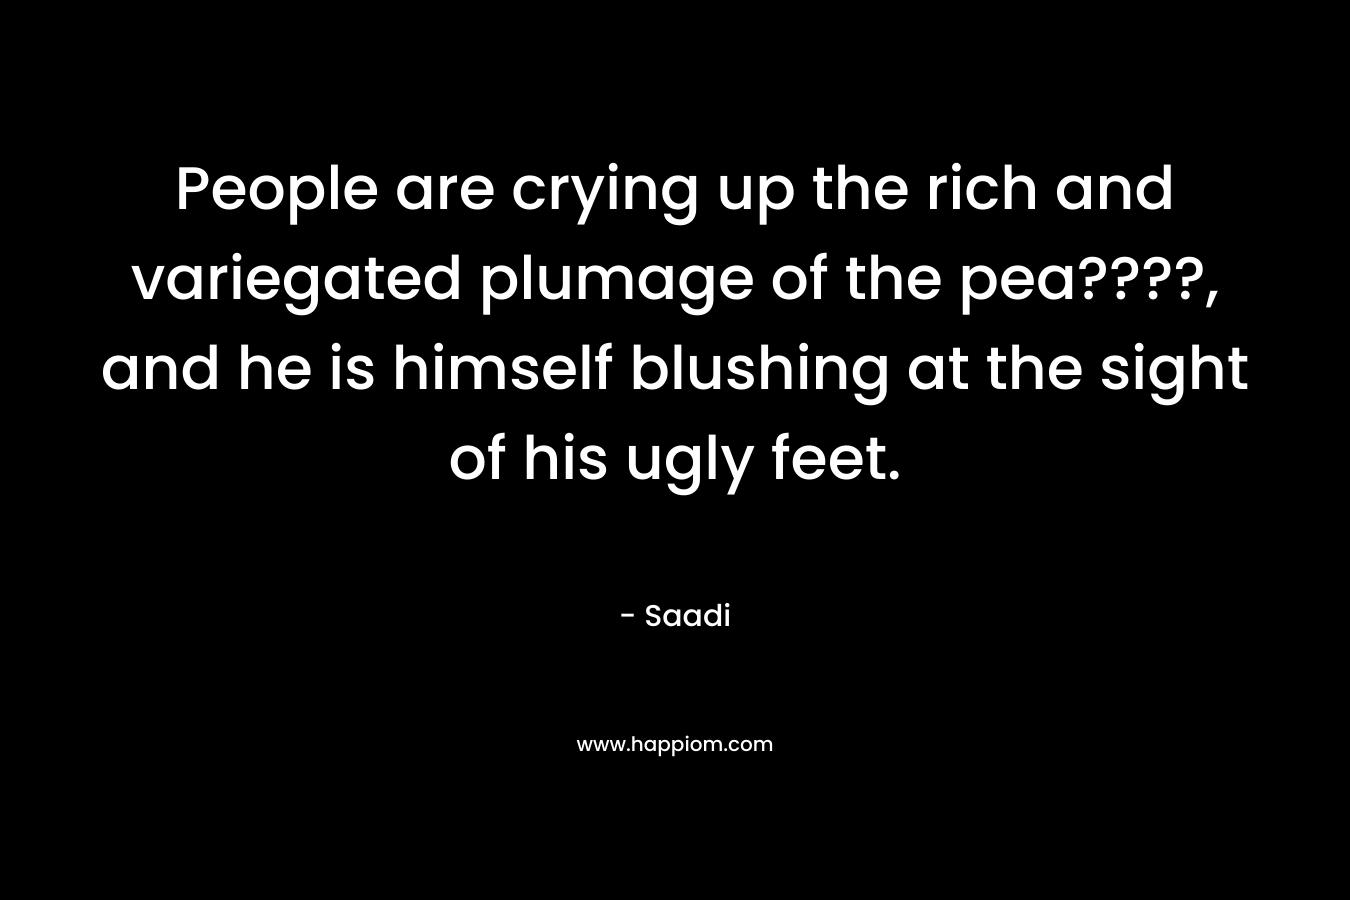 People are crying up the rich and variegated plumage of the pea????, and he is himself blushing at the sight of his ugly feet. – Saadi